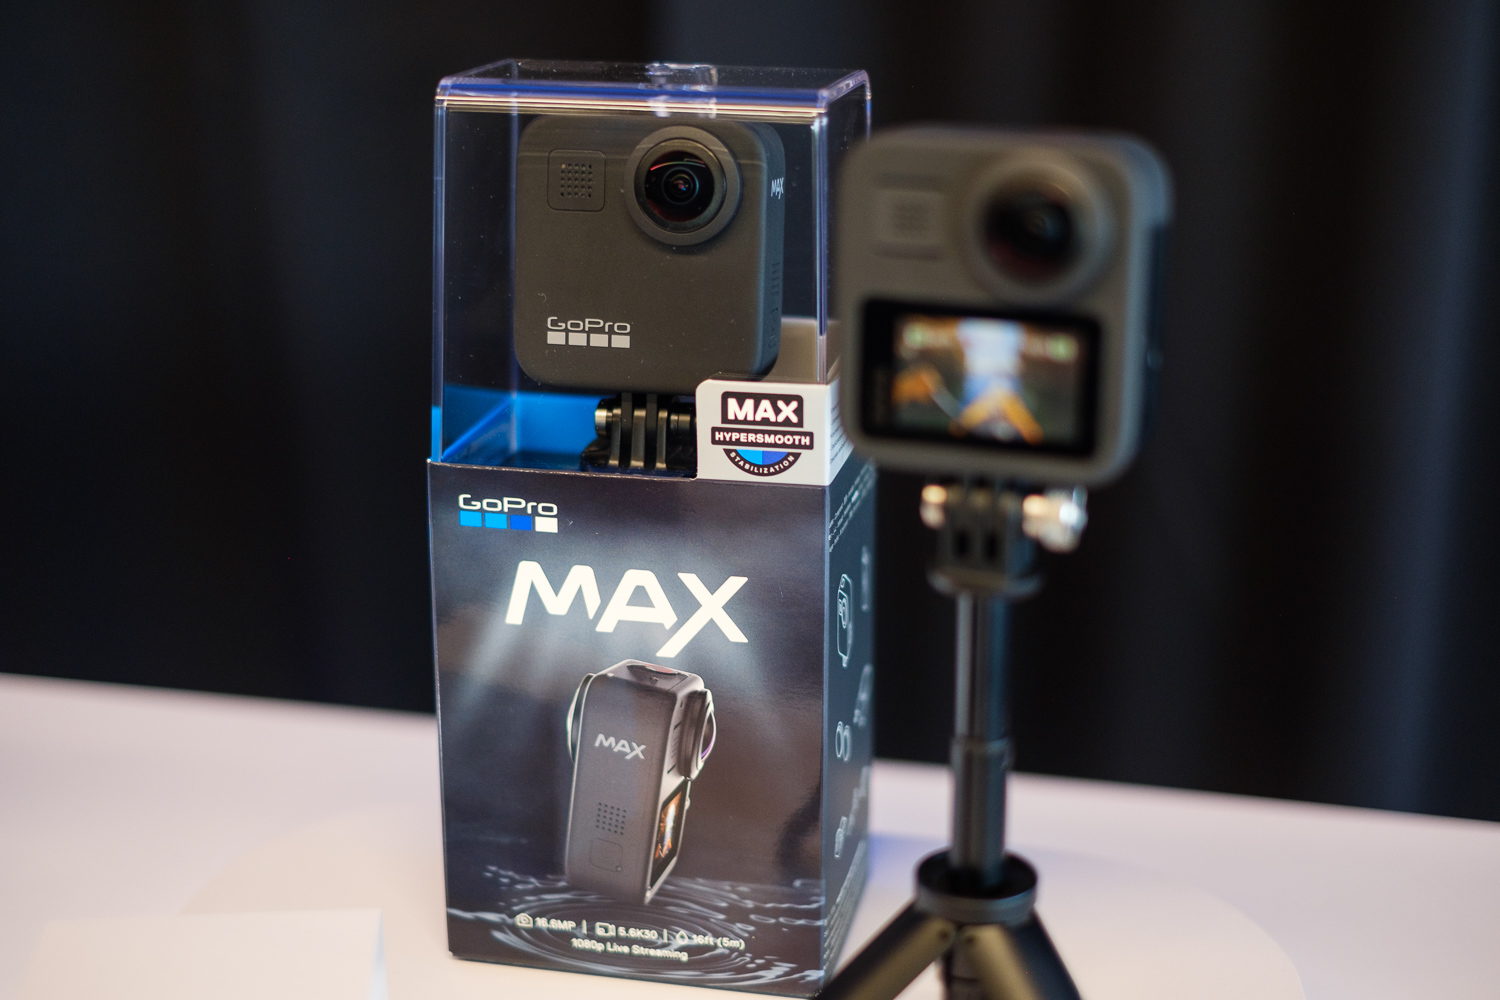 The New GoPro Max Does More, Costs Less Than the GoPro Fusion